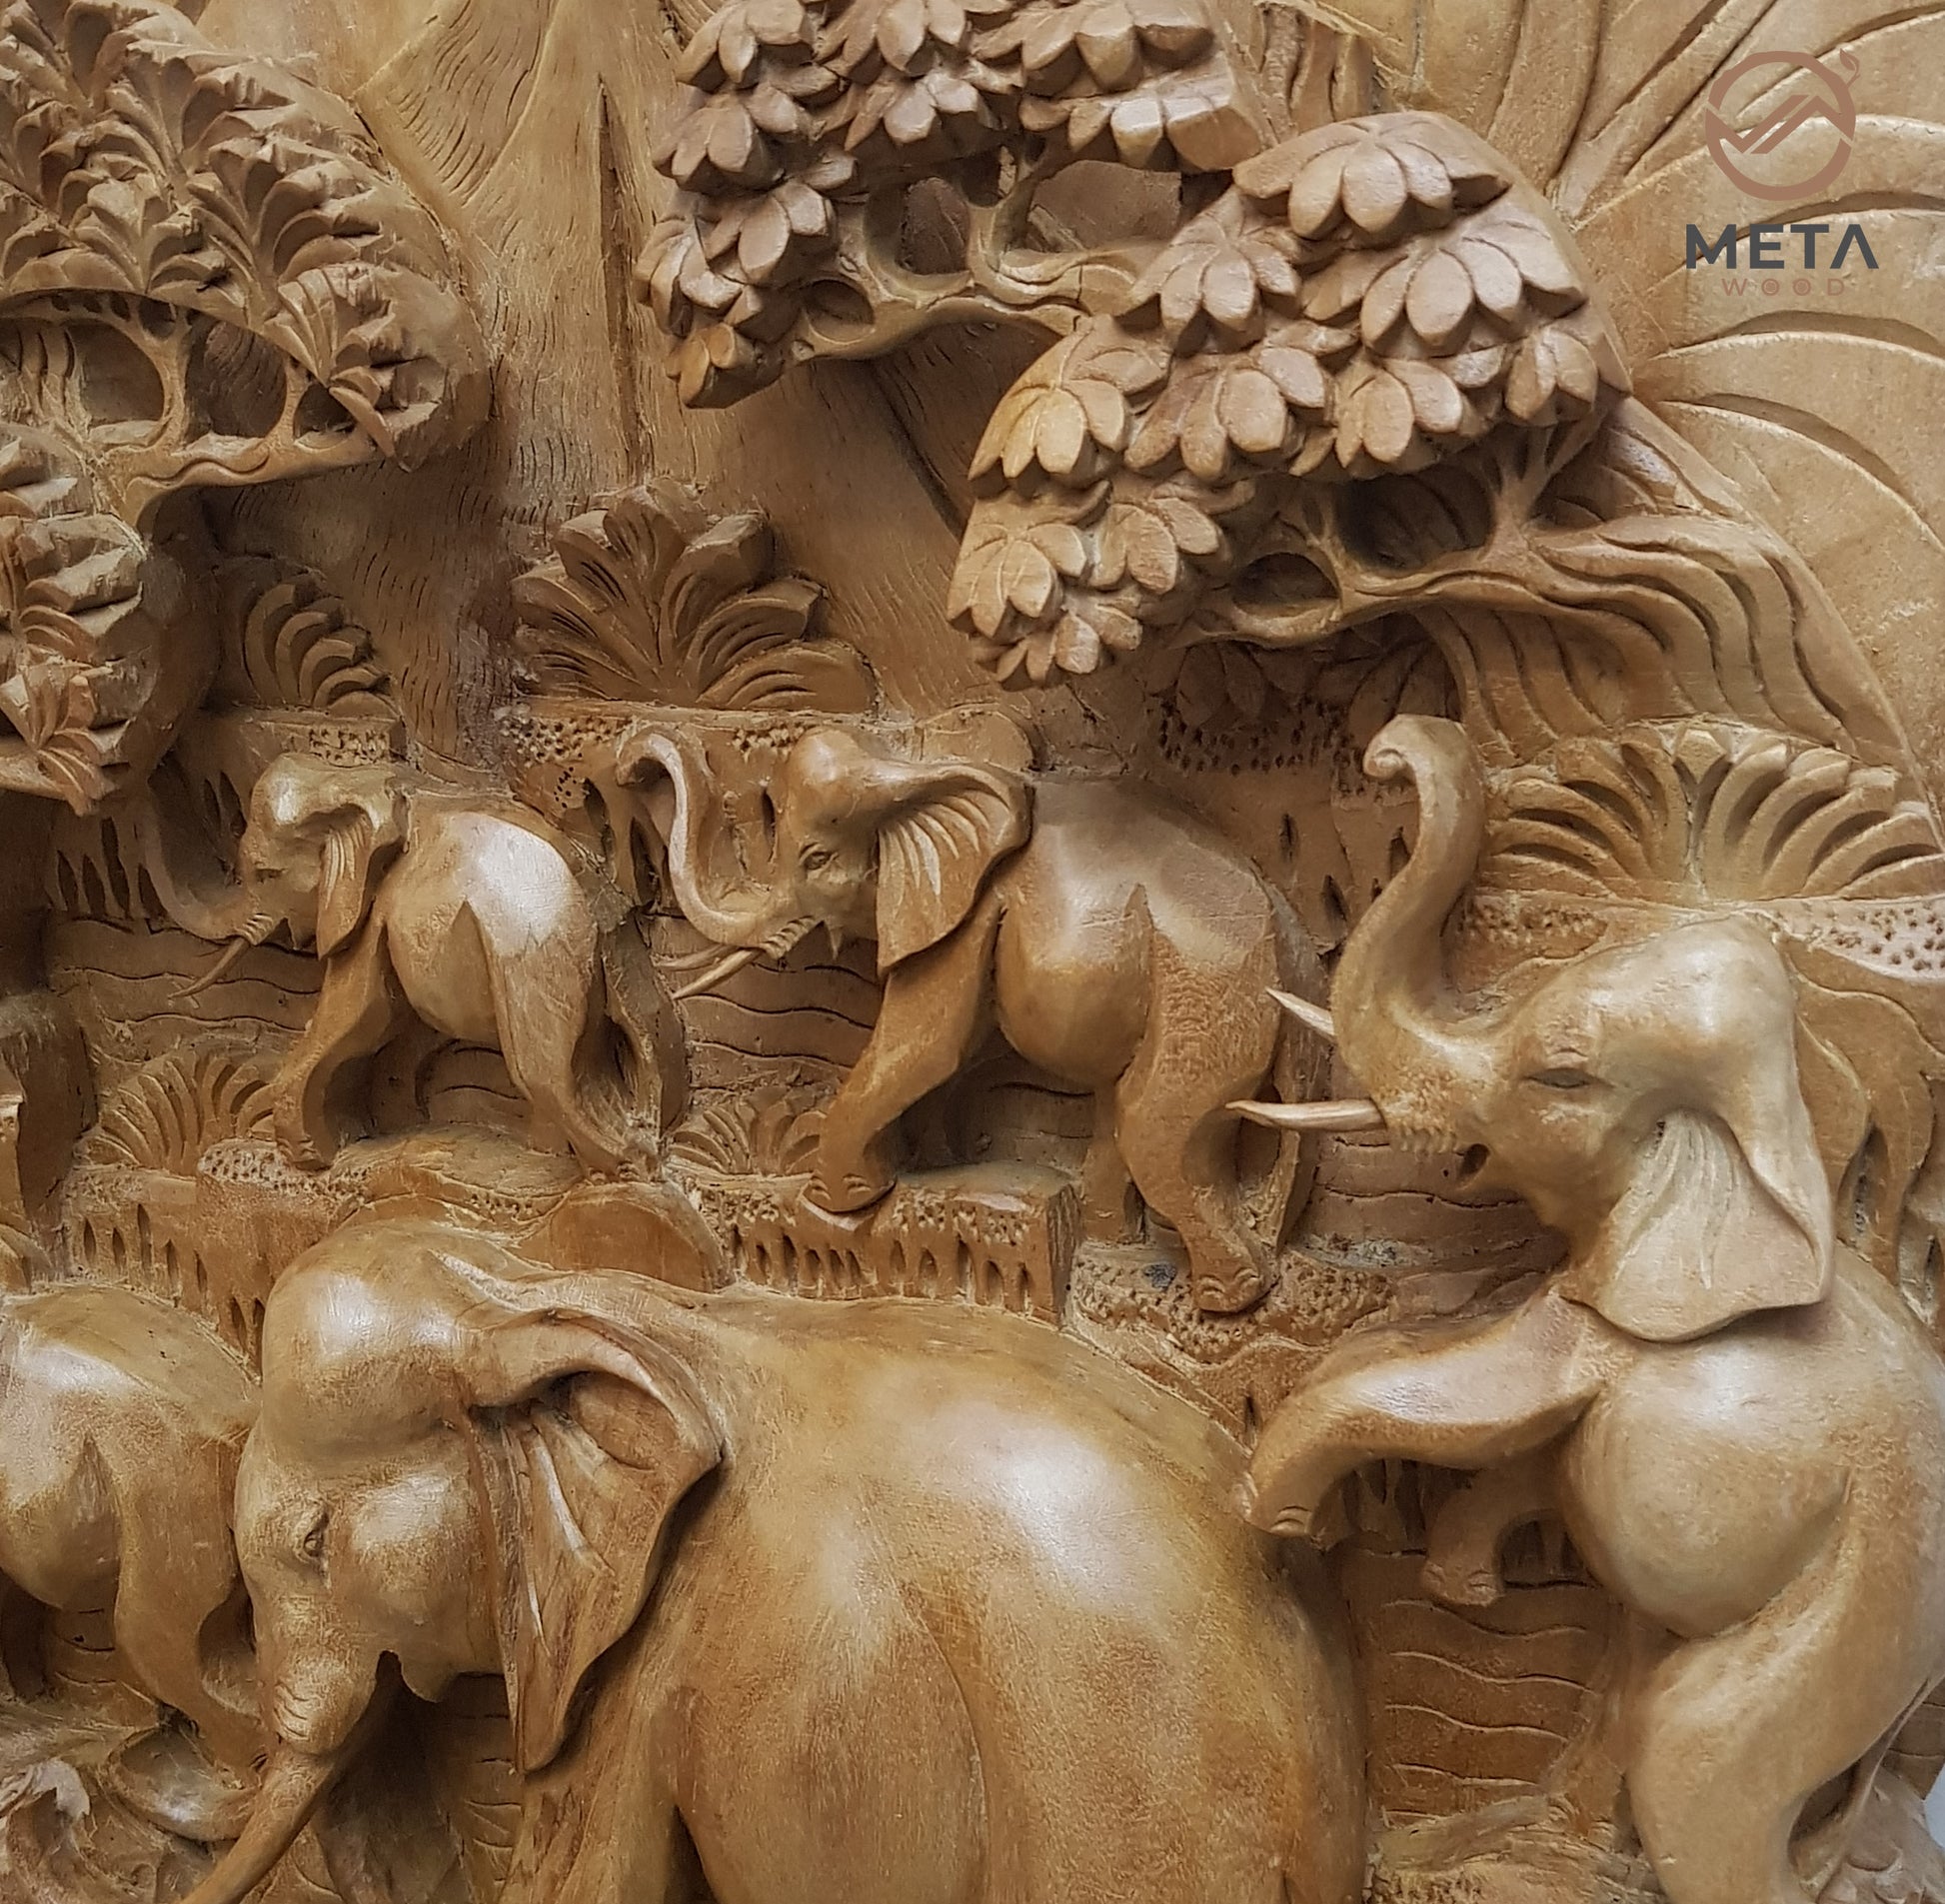 Hand Carved Balinese Wood Relief, Wall Mural Trip of Elephant Family – Meta  Wood